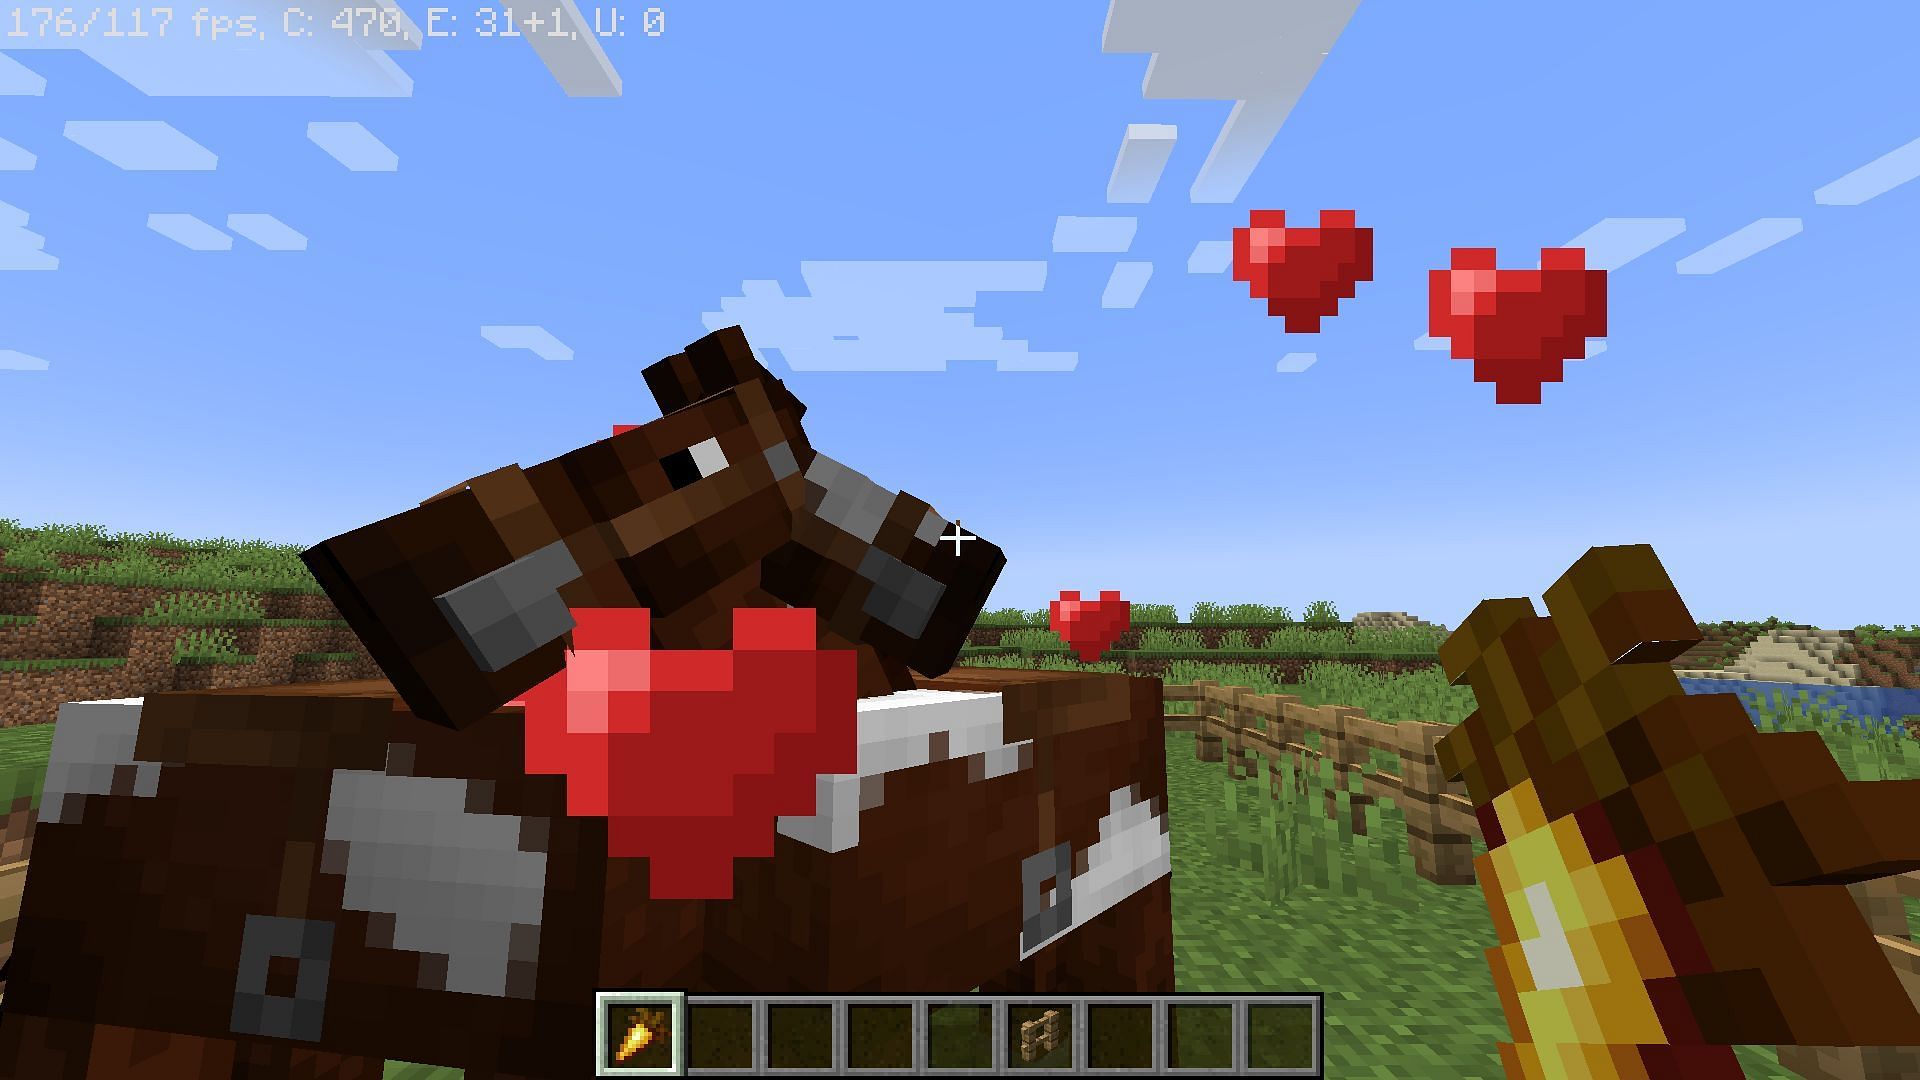 Horses breeding with each other after eating a golden carrot in Minecraft (Image via Mojang)